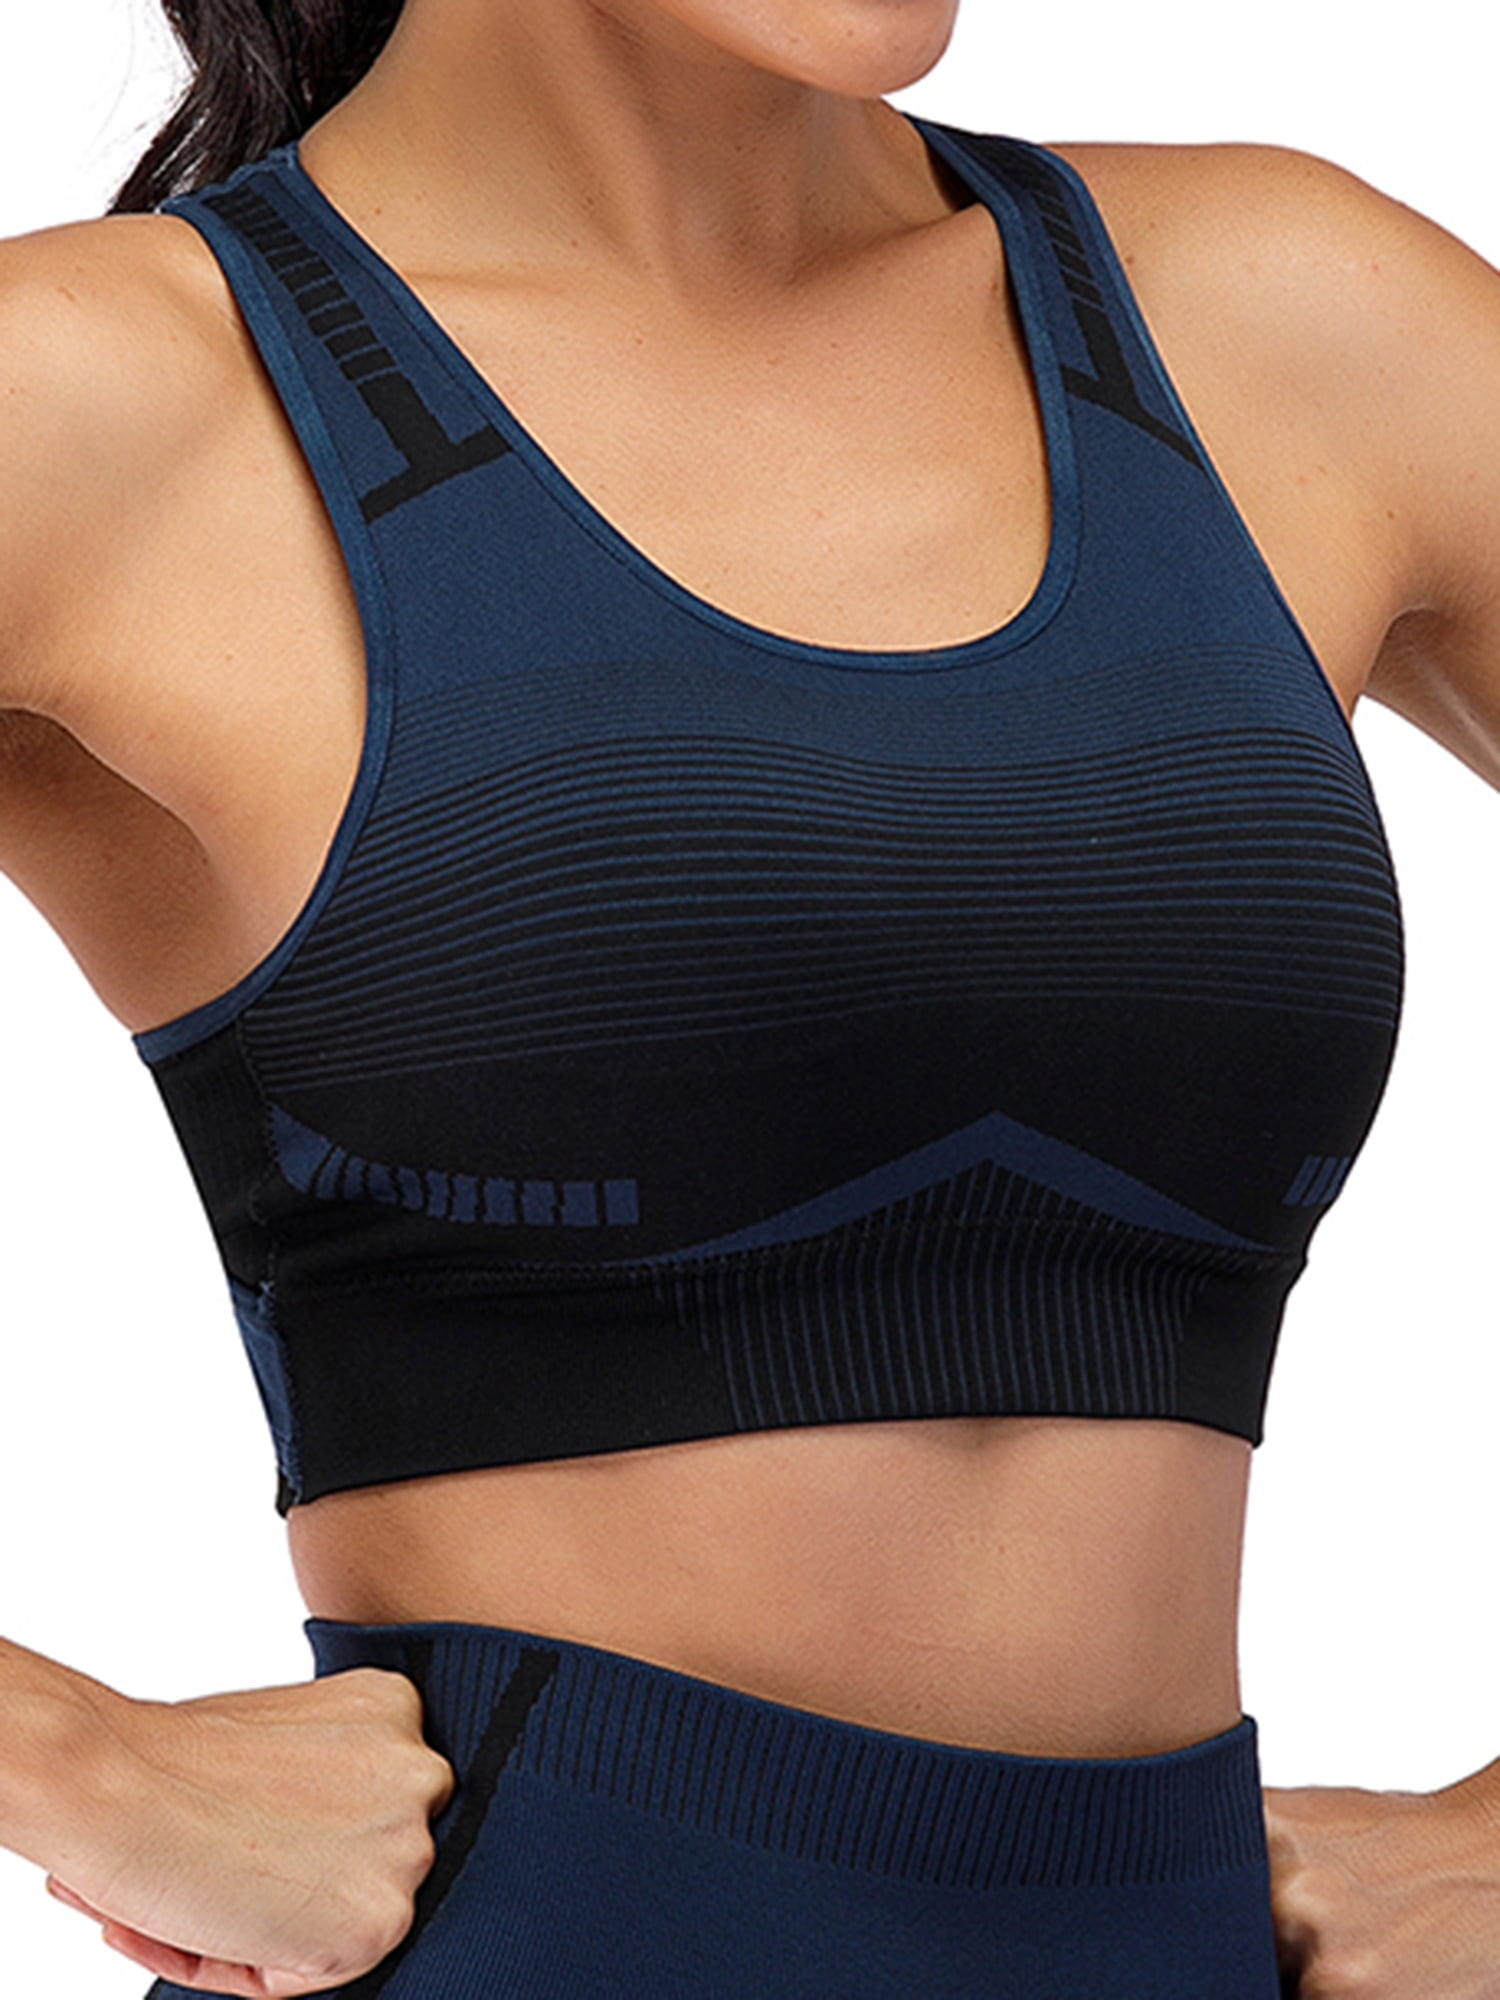 TOBWIZU Racerback Sports Bras for Women Plus Size Seamless Activewear Bras  Padded Workout Gym Sleep Everyday Bra Pack of 3 at  Women's Clothing  store